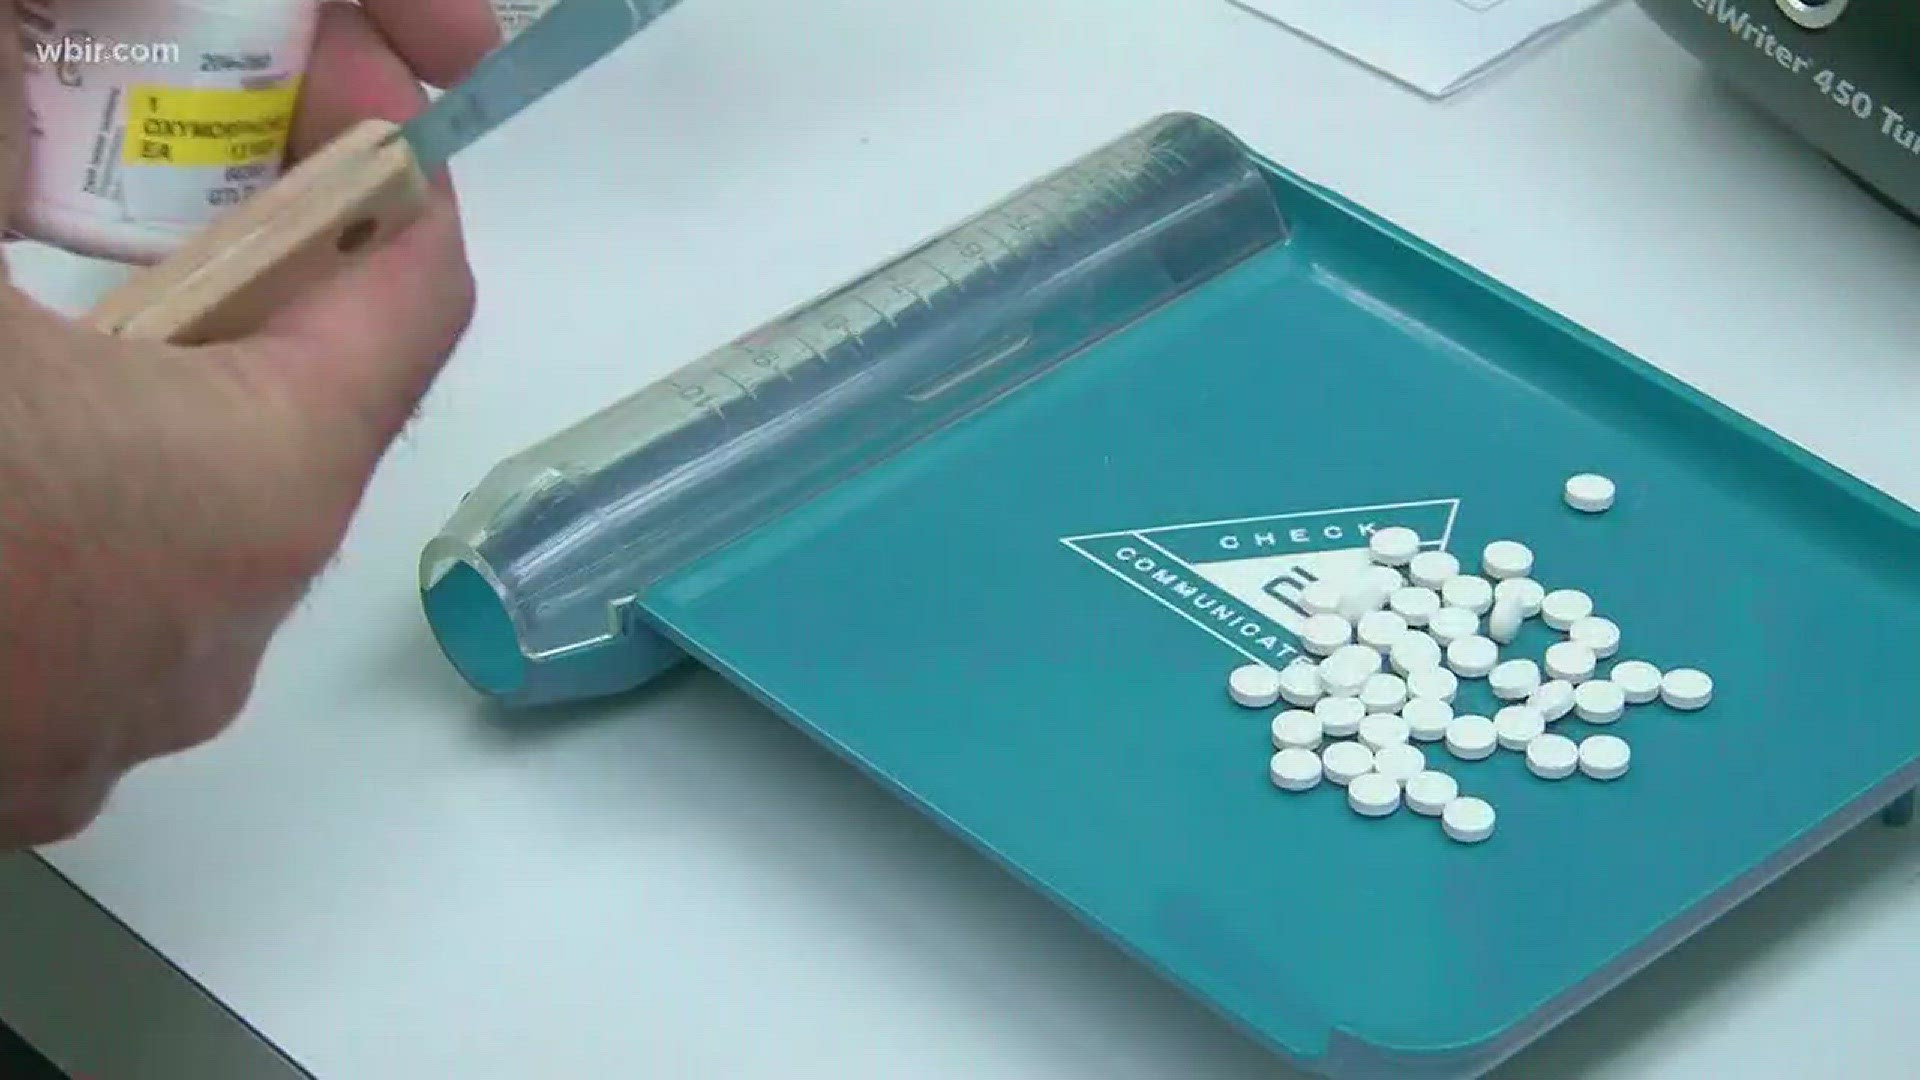 A day after President Trump declared the opioid epidemic a nationwide health emergency, state leaders are hoping this brings more money and attention to the issue.